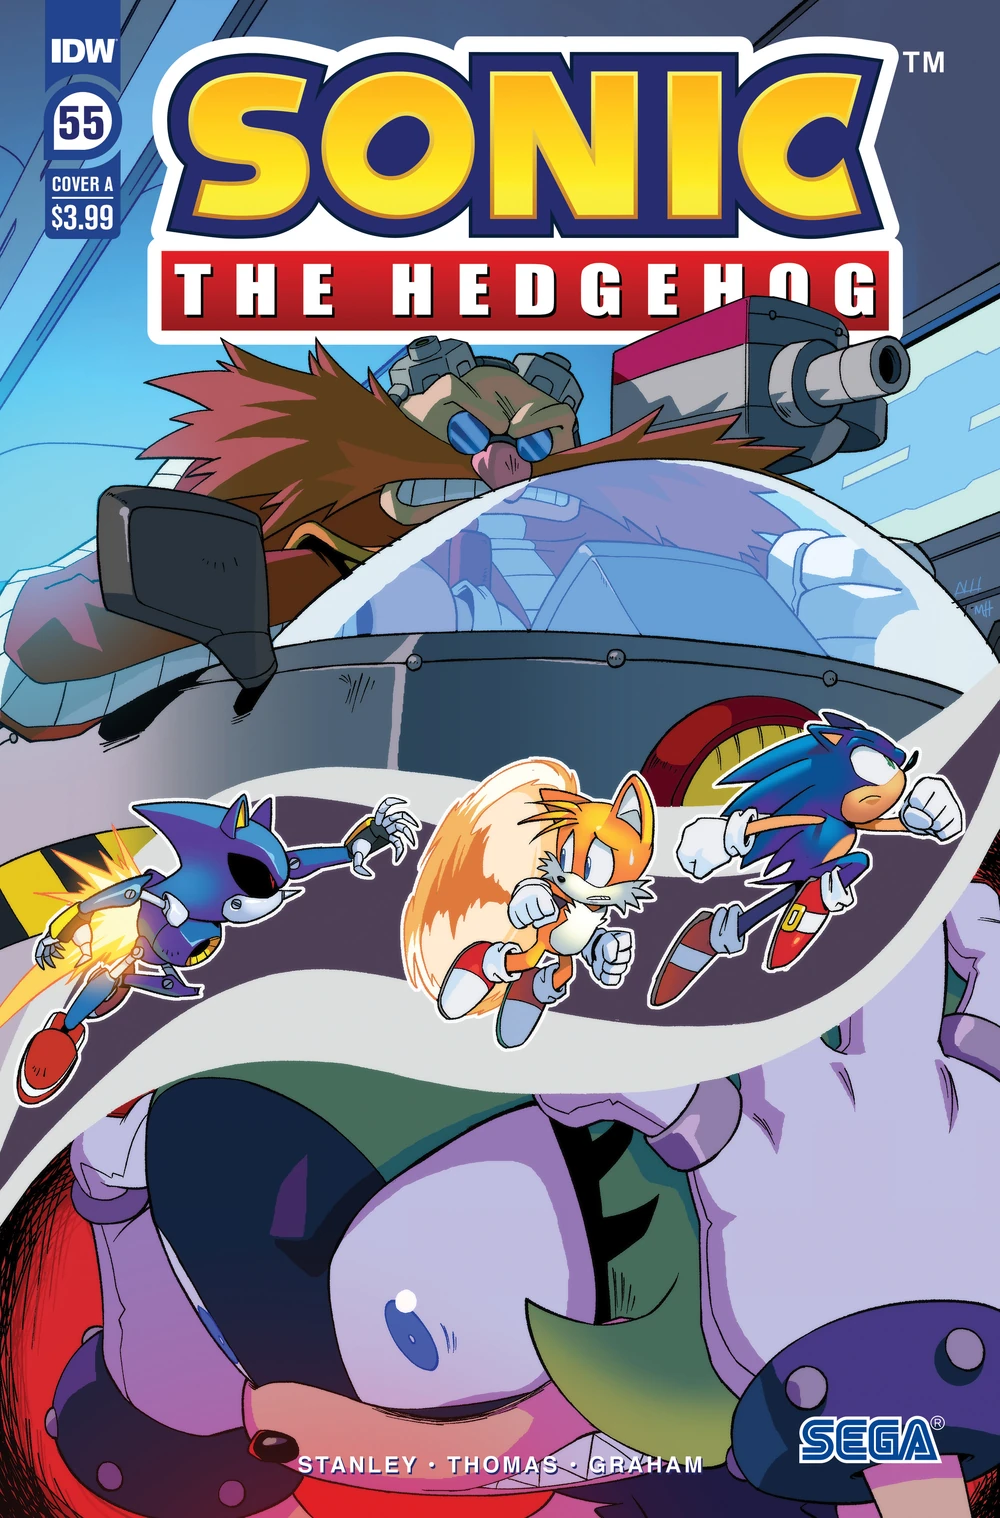 Sonic The Hedgehog #55 Cover A